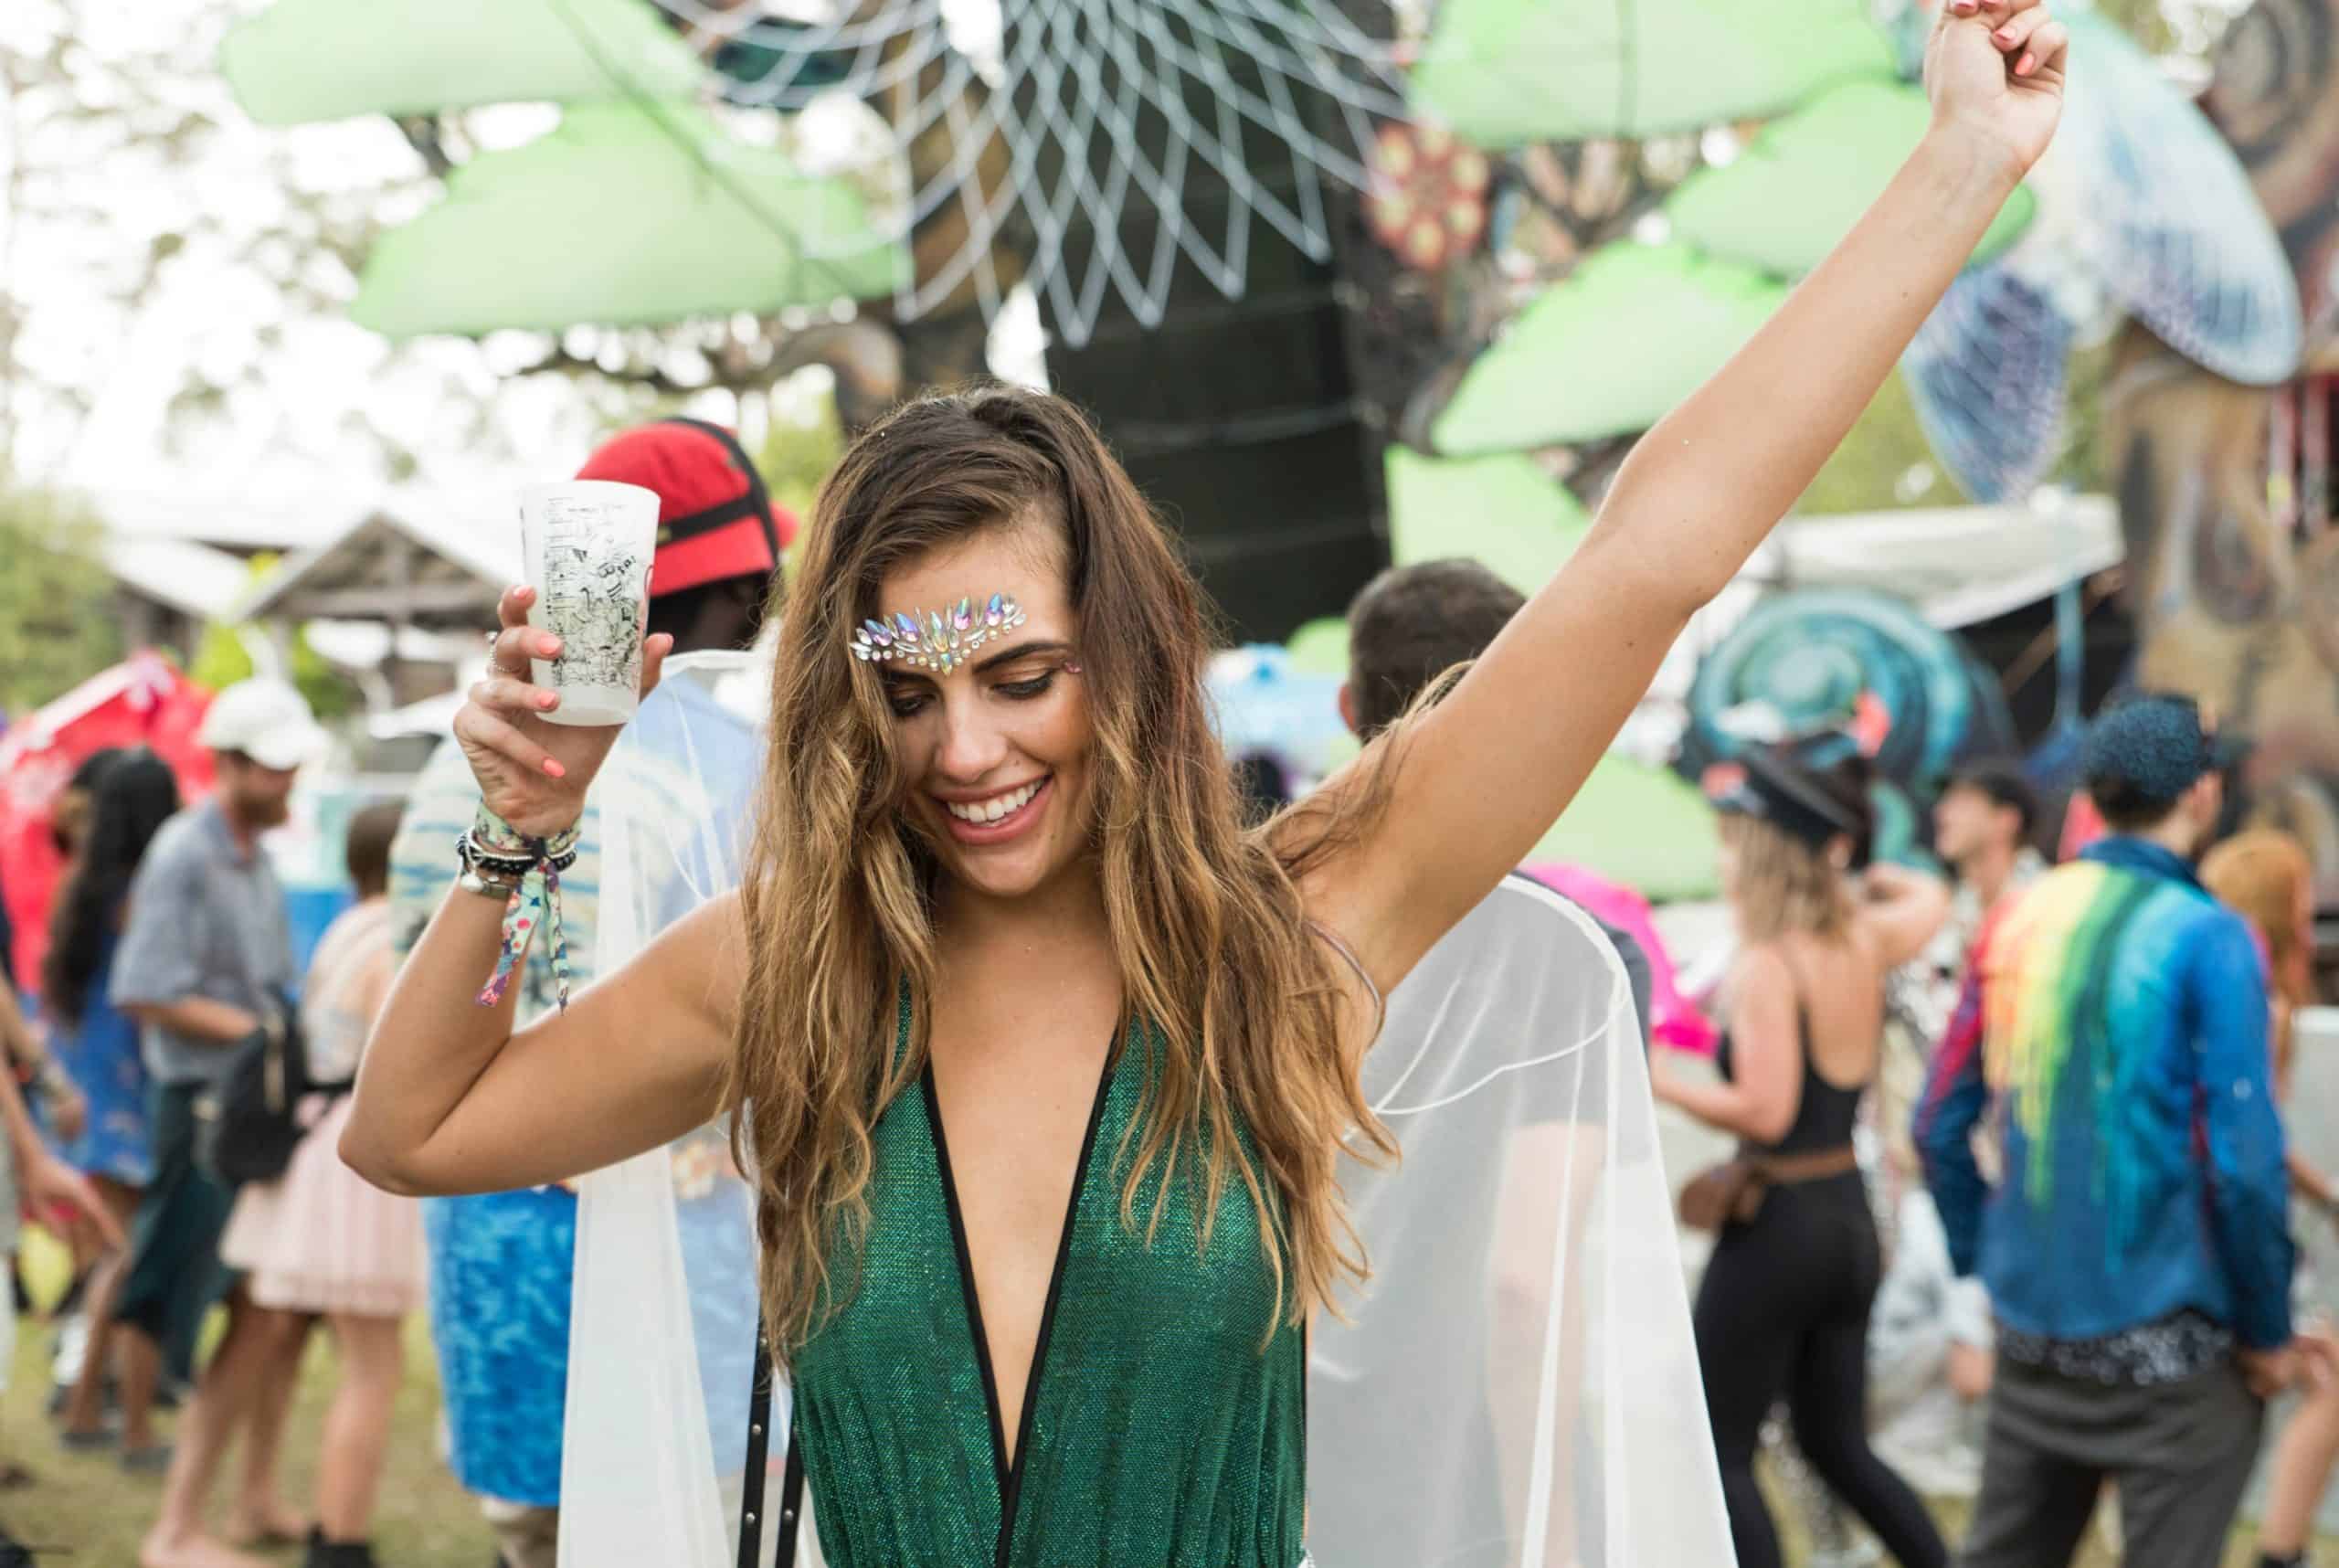 How to dress fashionably for an outdoor music festival